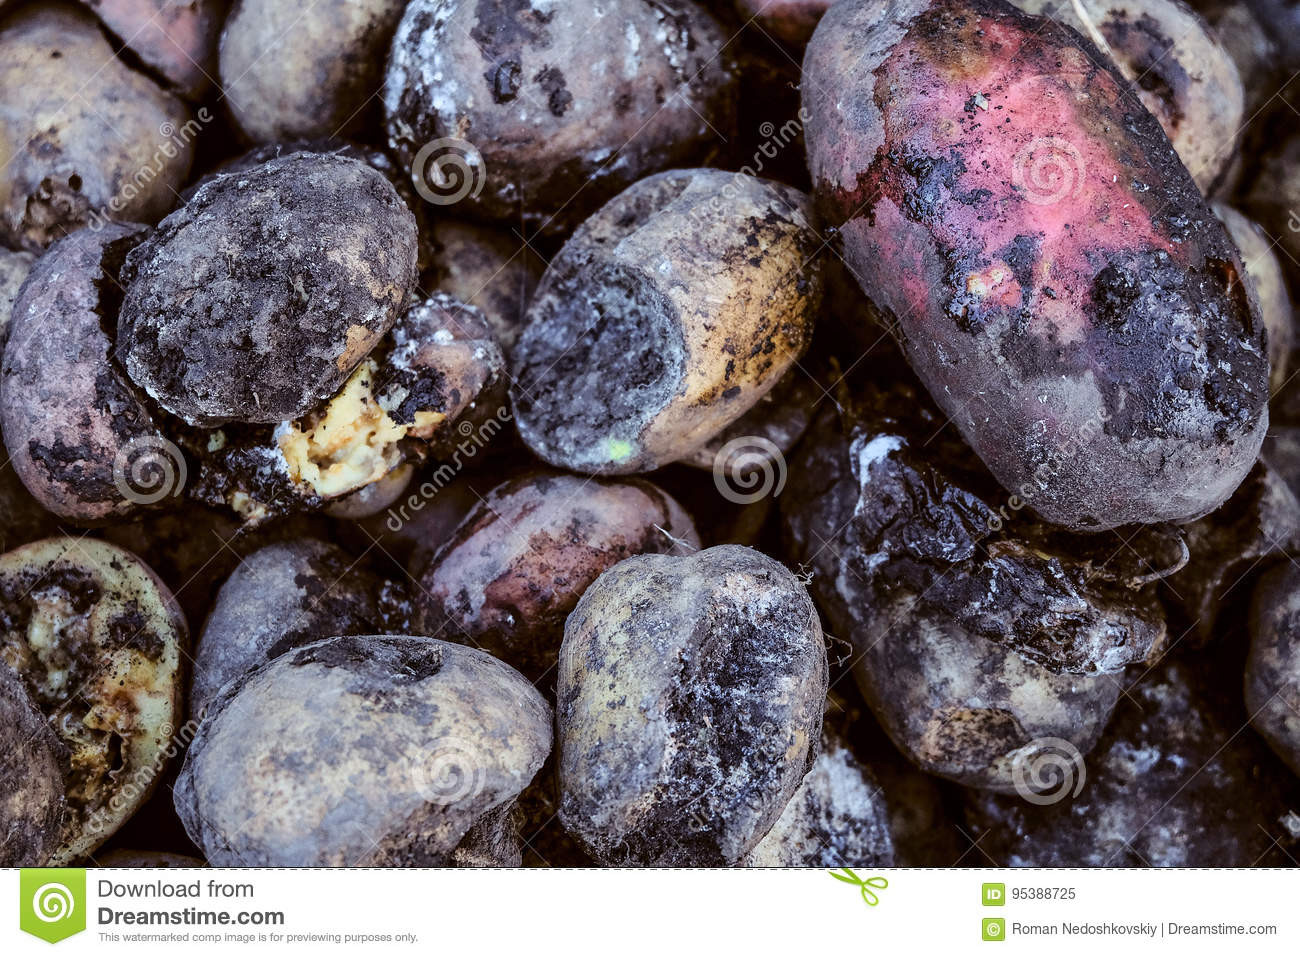 How To Tell If A Potato Is Bad
 Spoiled Rotten Potato Crop Failure Bad Harvest Concept